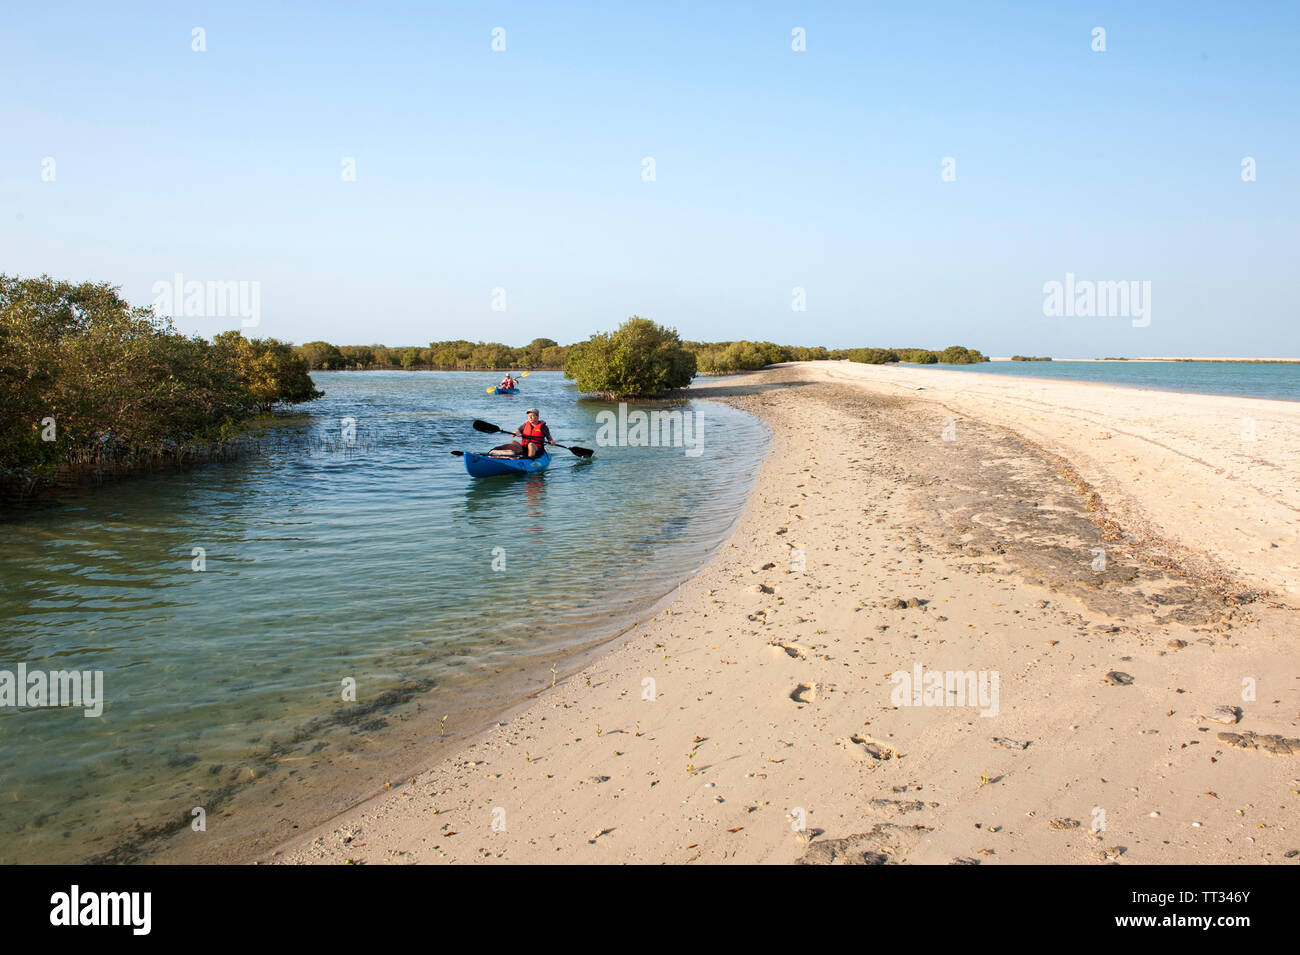 Kayaking in the mangrove forest on Sir Bani Yas, an island in the Persian Gulf, United Arab Emirates. Stock Photo